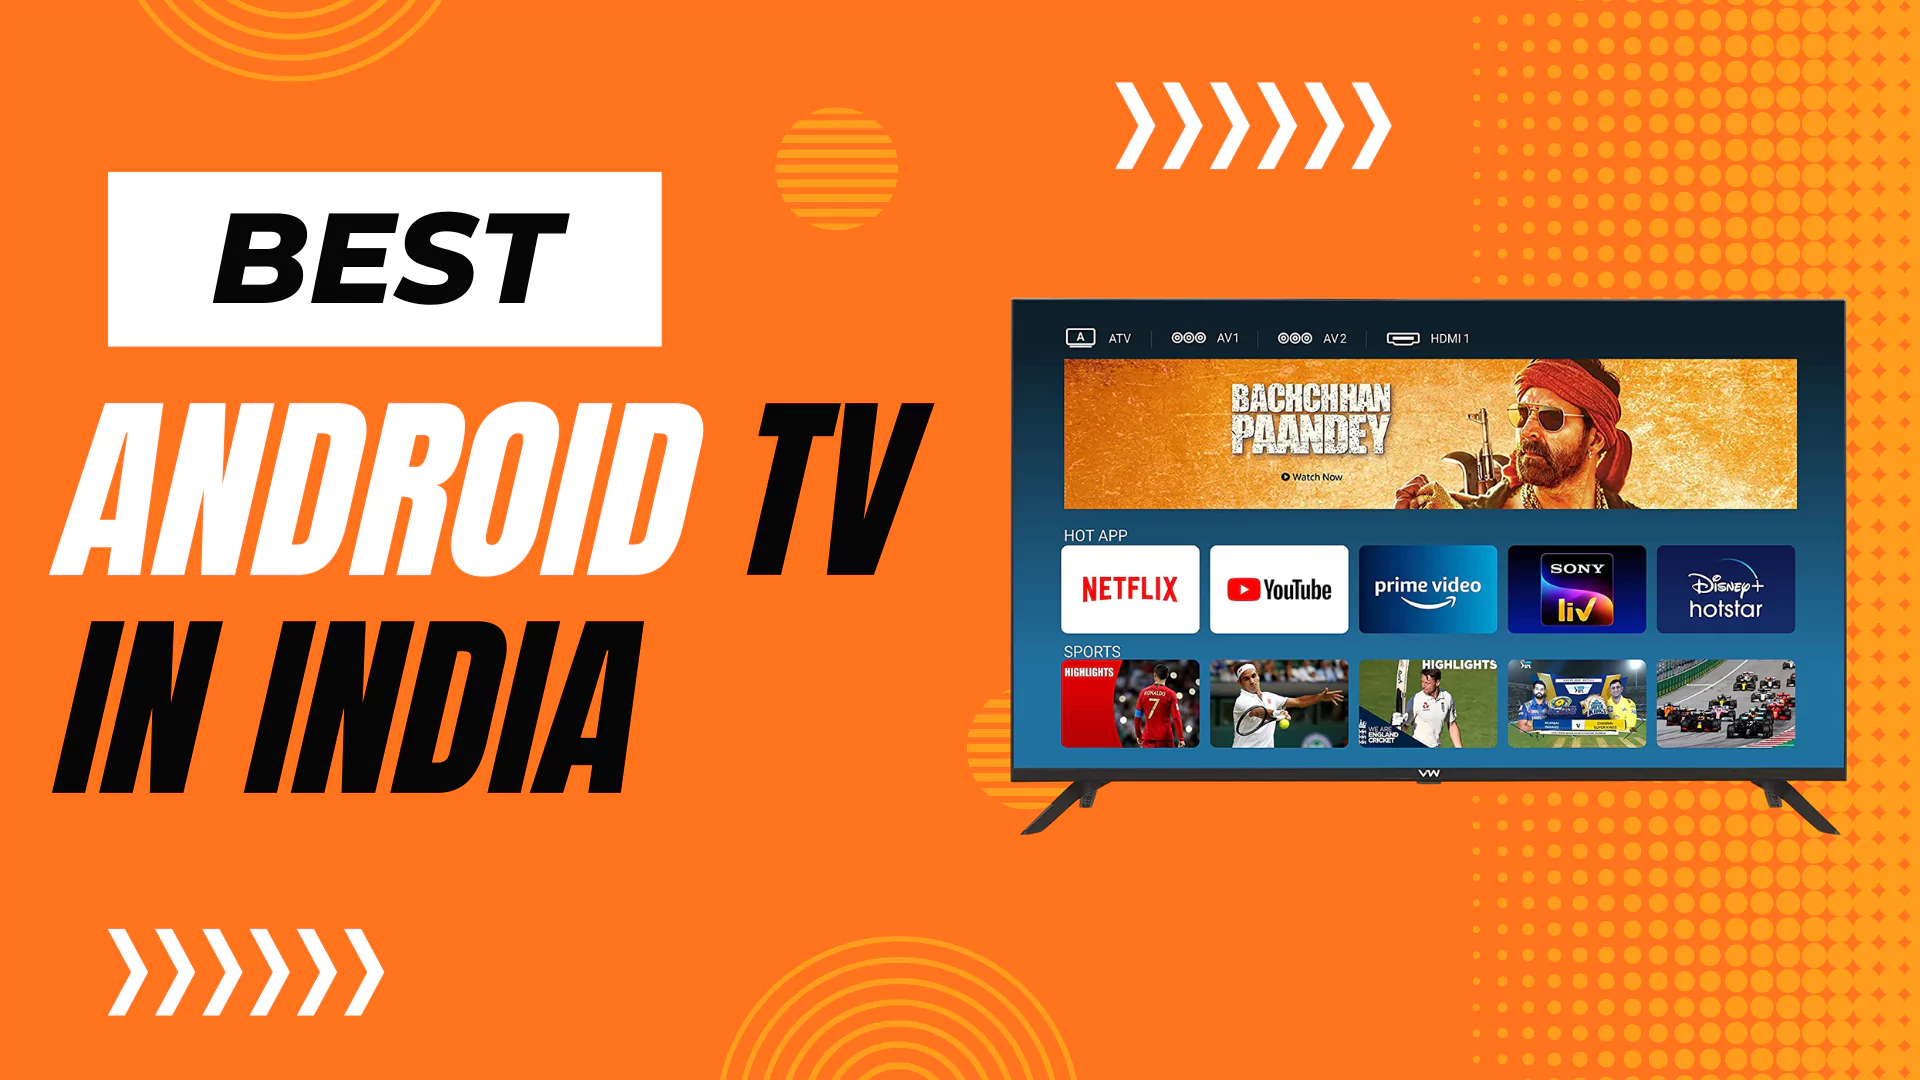 Best Android TV in India